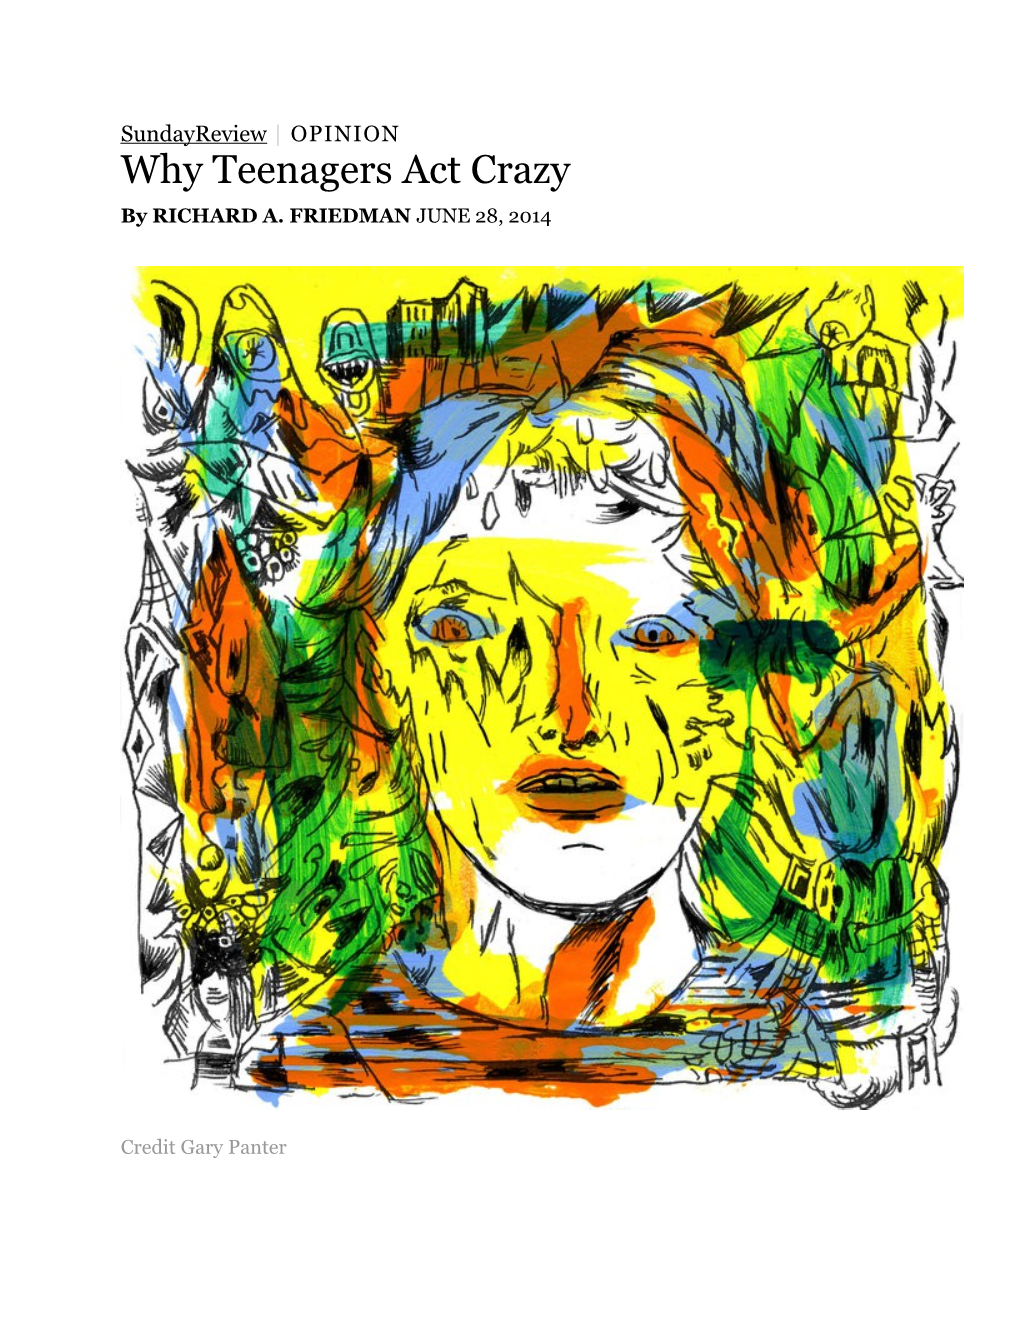 Why Teenagers Act Crazy